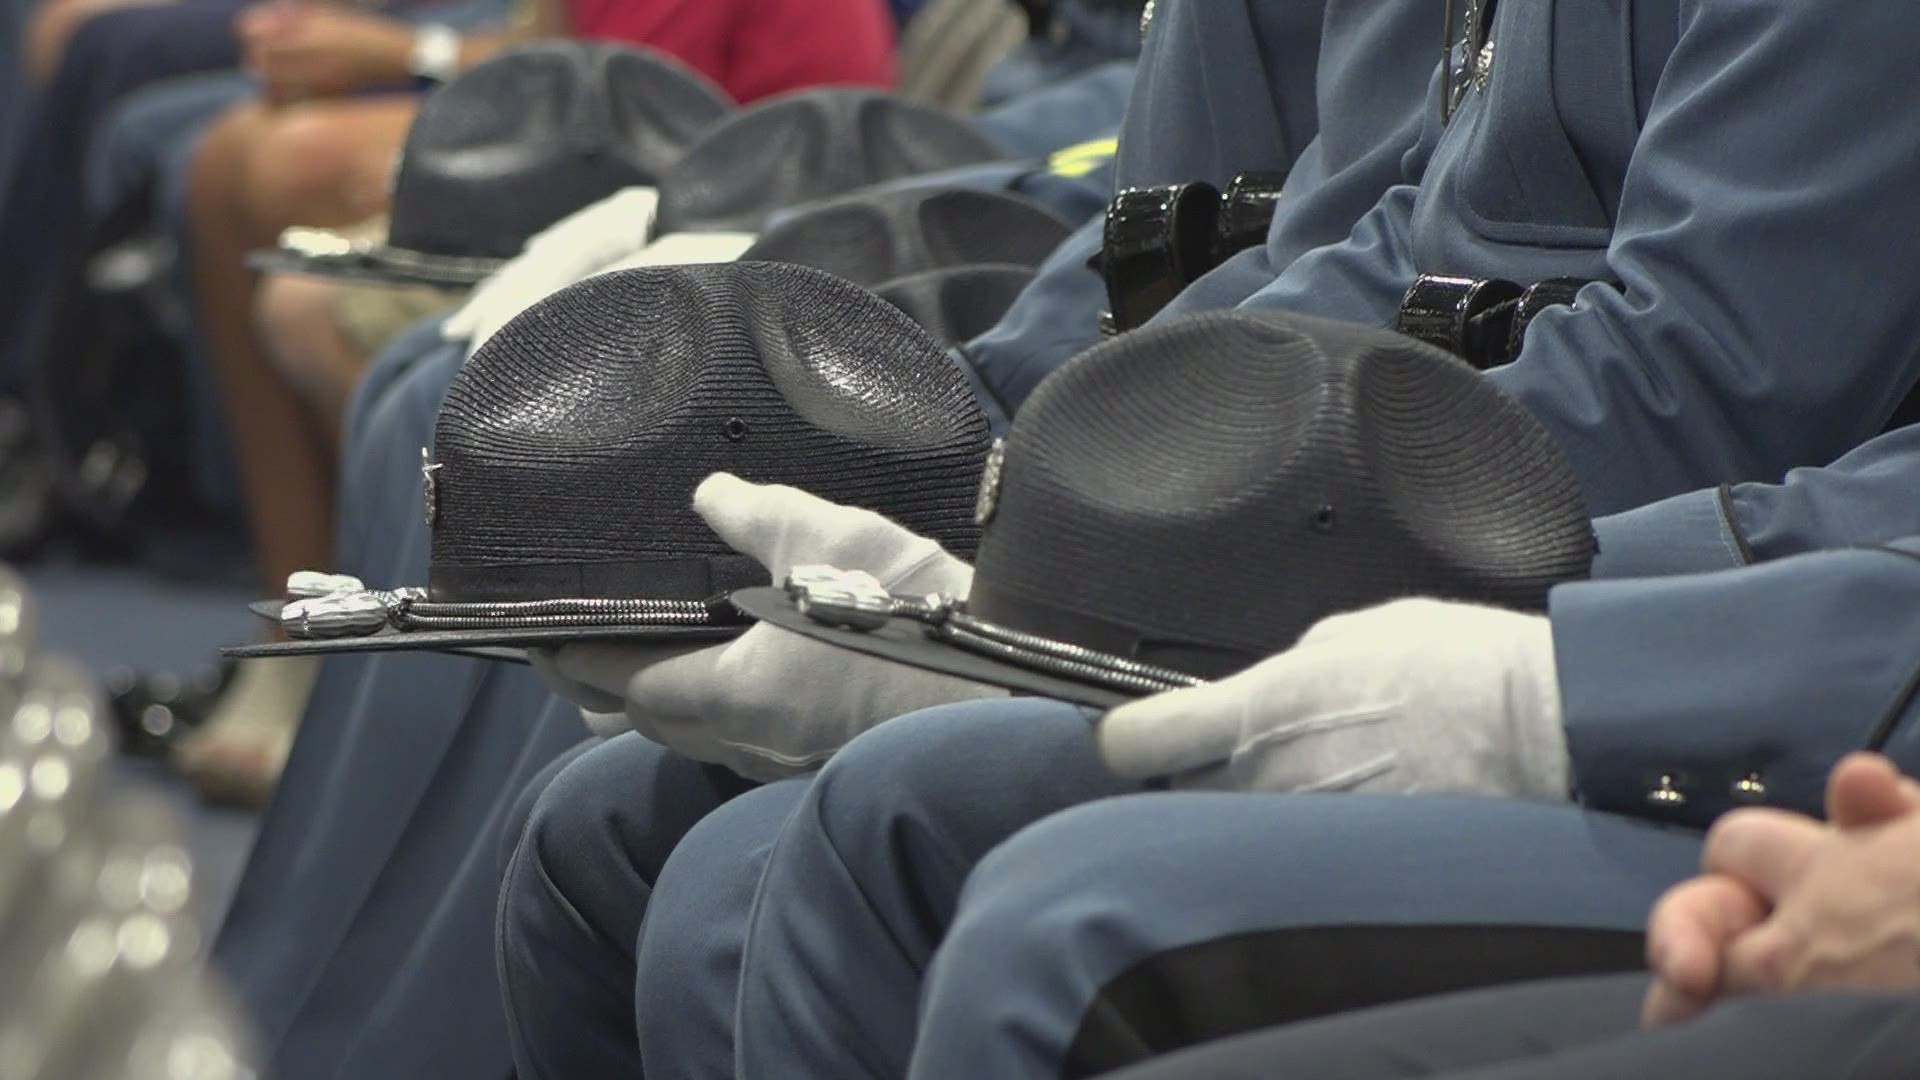 The ceremony was held at The Maine Criminal Justice Academy in Vasselborro.